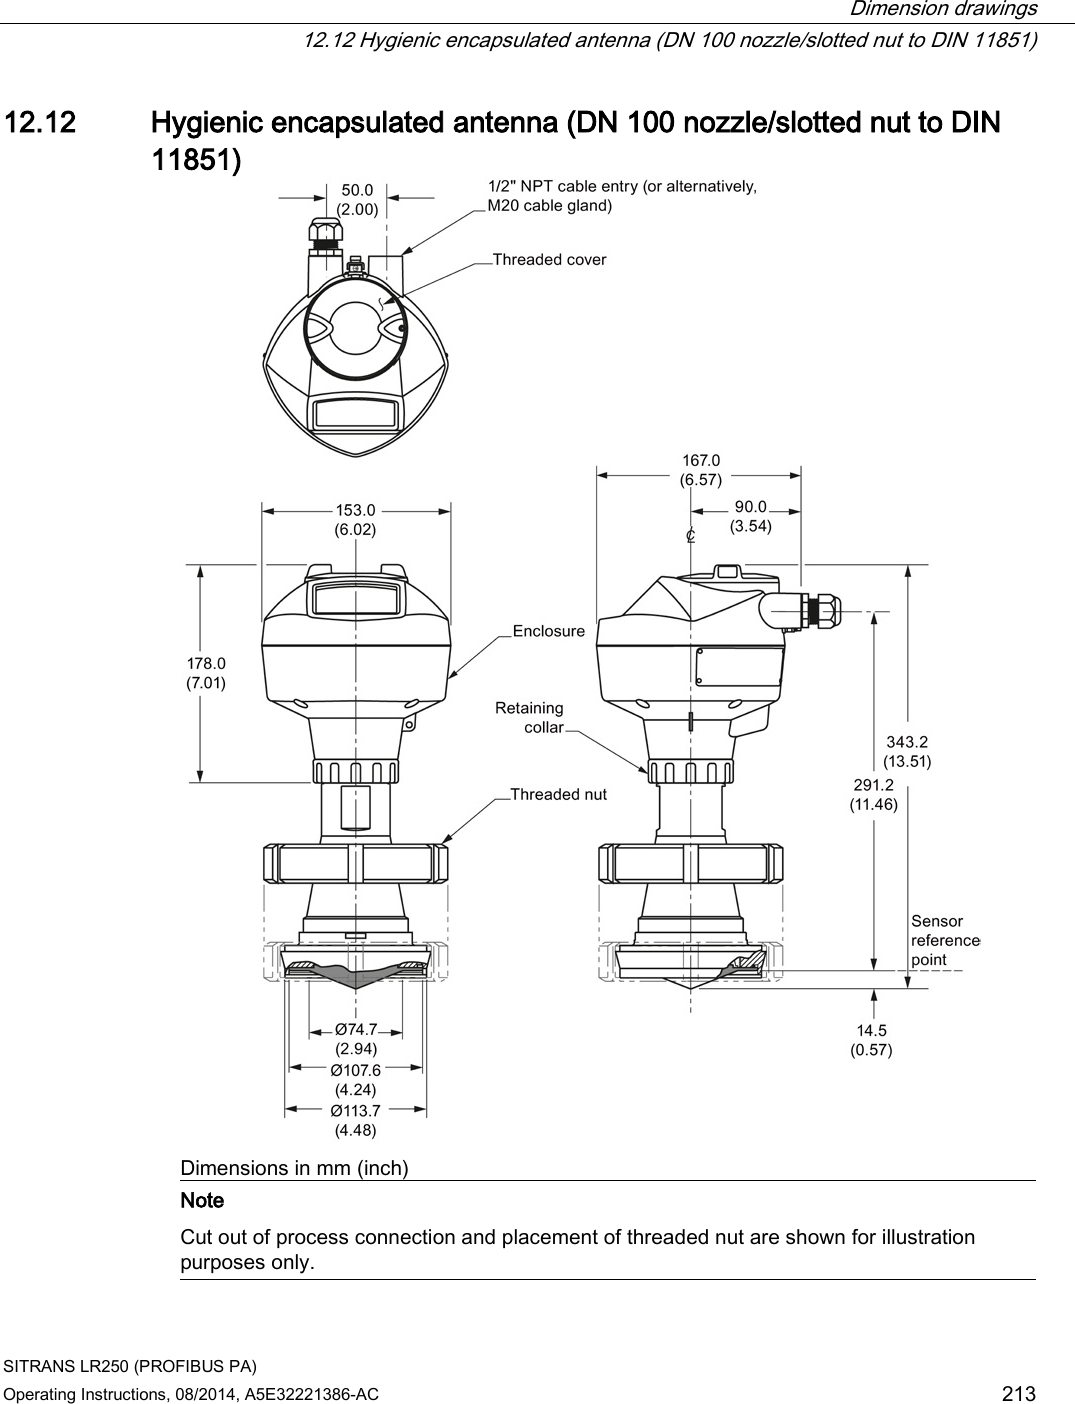  Dimension drawings  12.12 Hygienic encapsulated antenna (DN 100 nozzle/slotted nut to DIN 11851) SITRANS LR250 (PROFIBUS PA) Operating Instructions, 08/2014, A5E32221386-AC 213 12.12 Hygienic encapsulated antenna (DN 100 nozzle/slotted nut to DIN 11851)  Dimensions in mm (inch)  Note Cut out of process connection and placement of threaded nut are shown for illustration purposes only.  